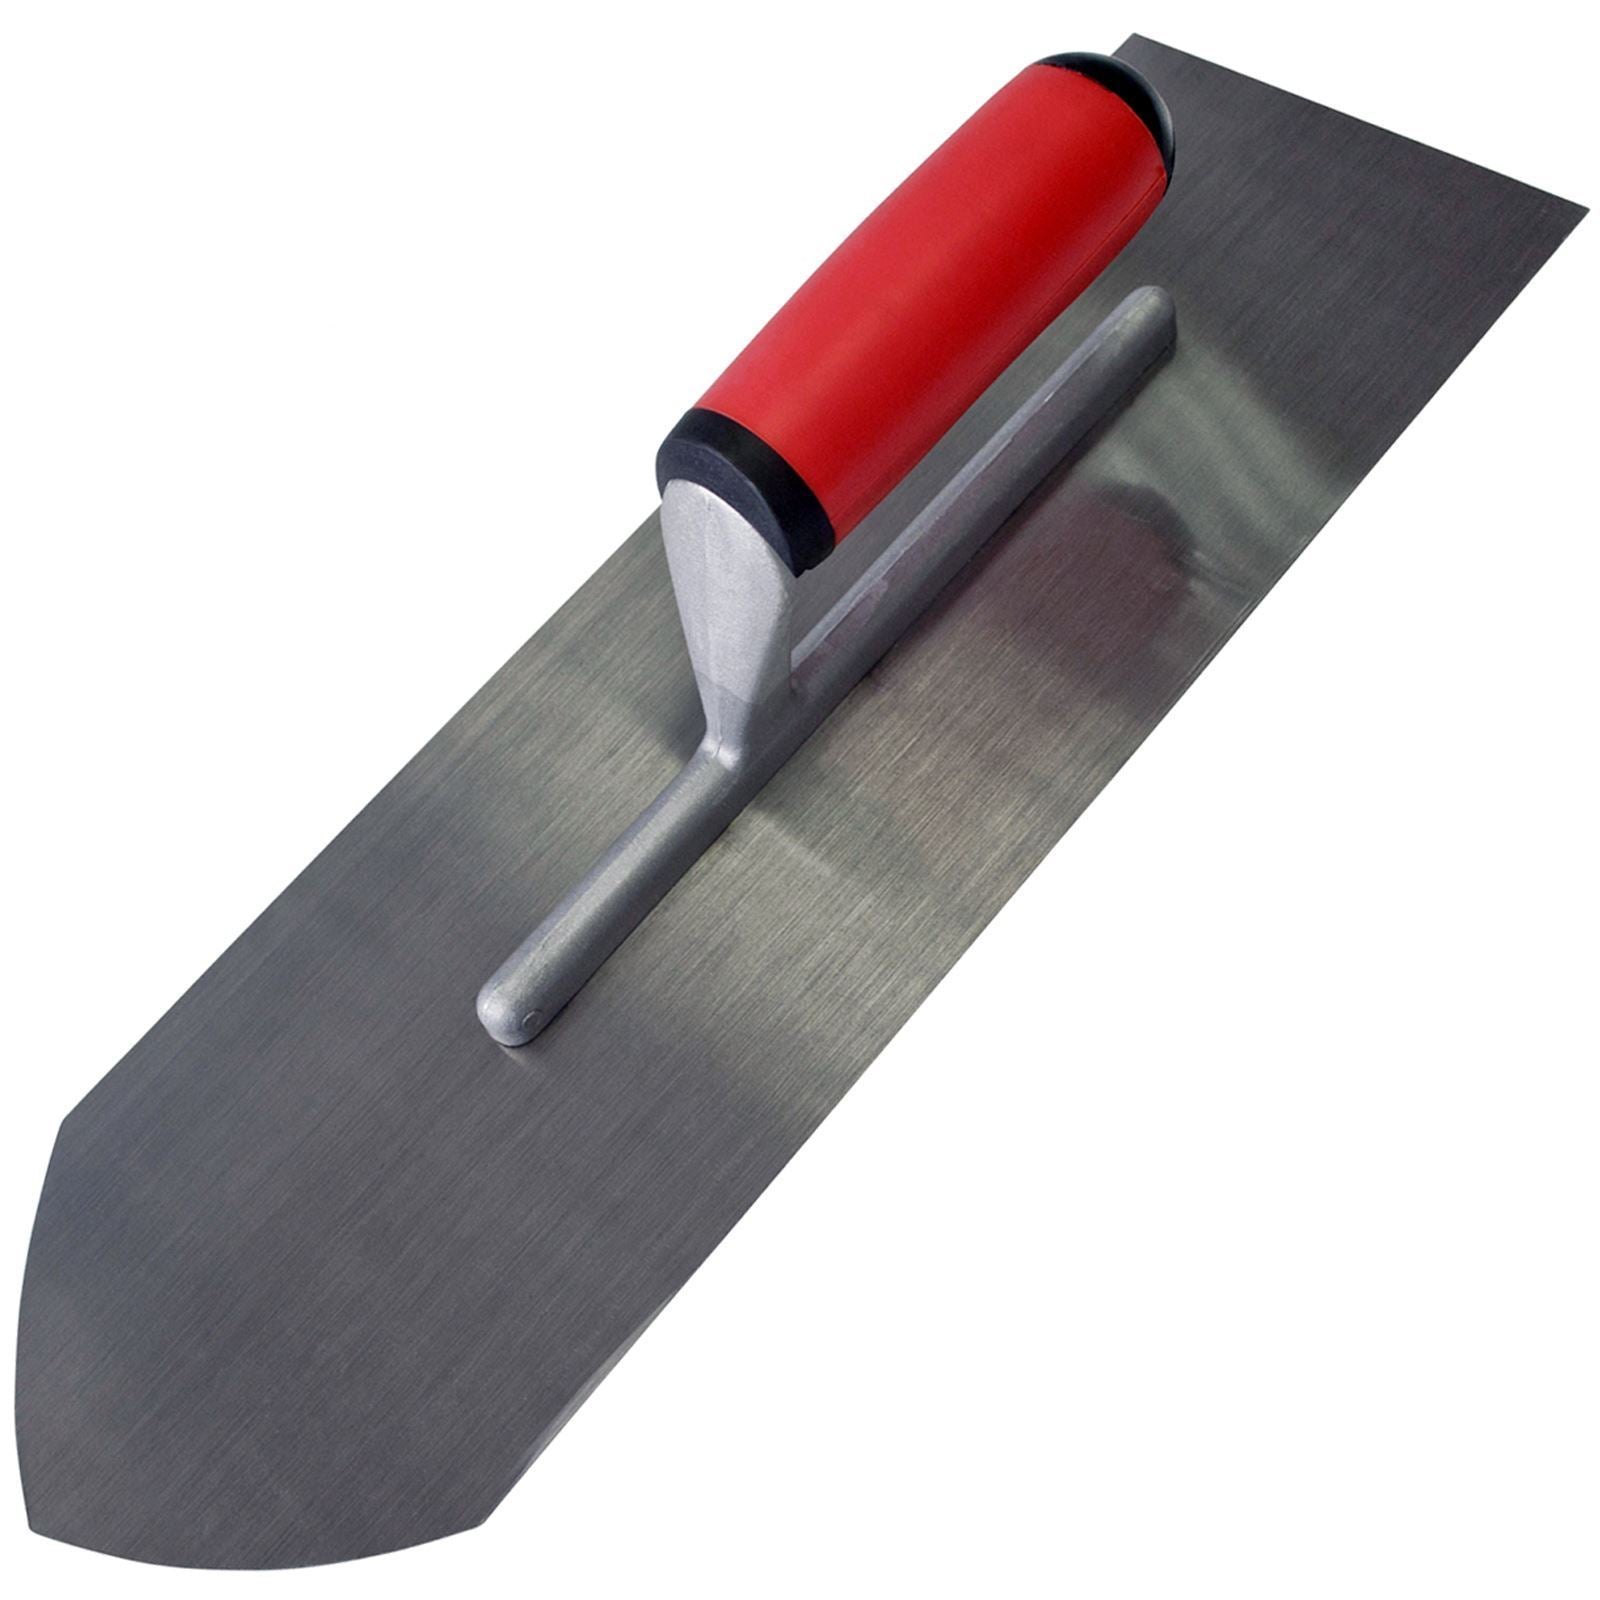 Amtech 400mm (16") Cement Finishing Trowel with Soft Grip Handle